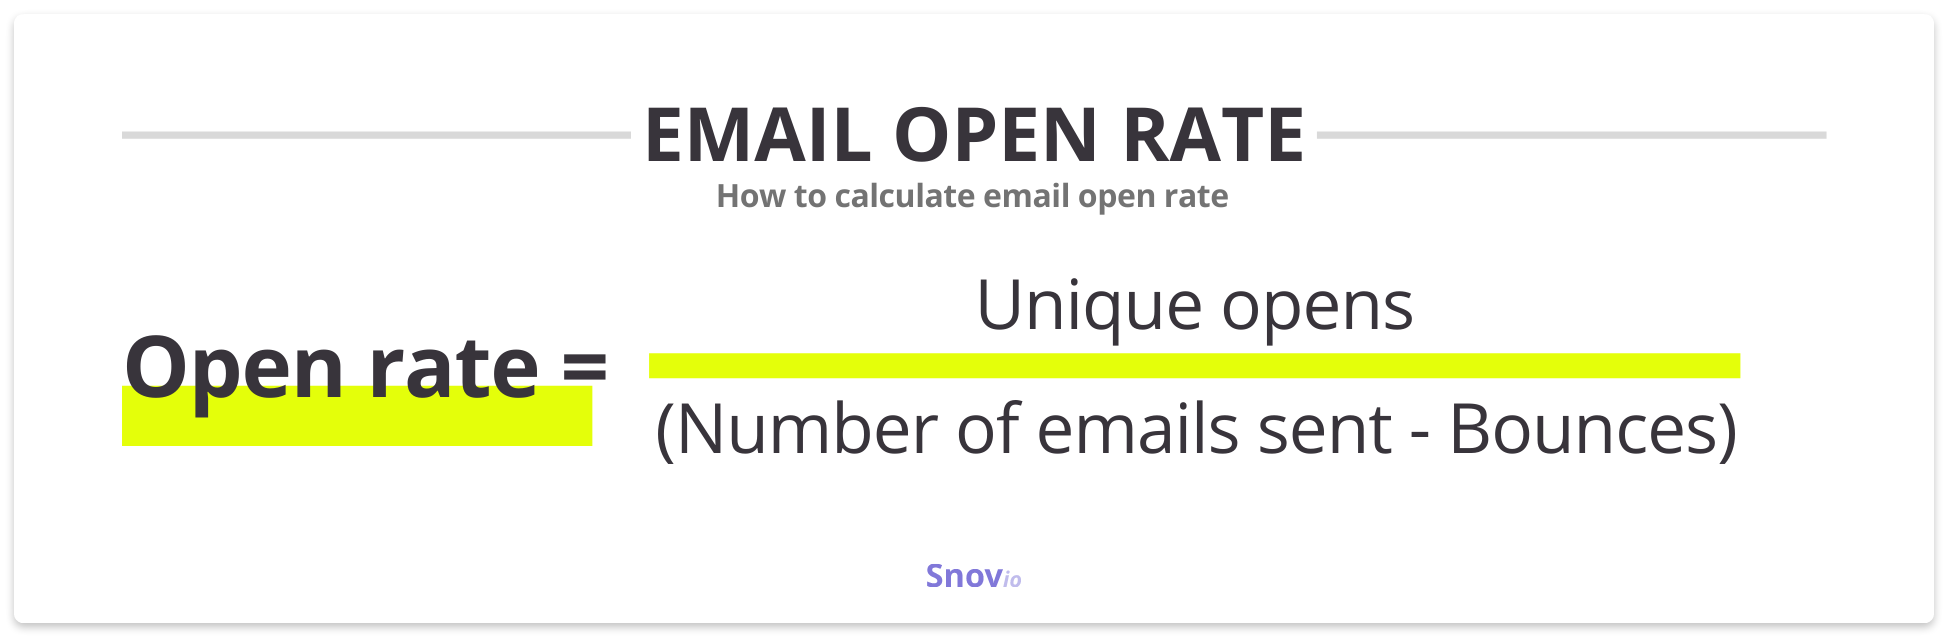 Email open rate formula